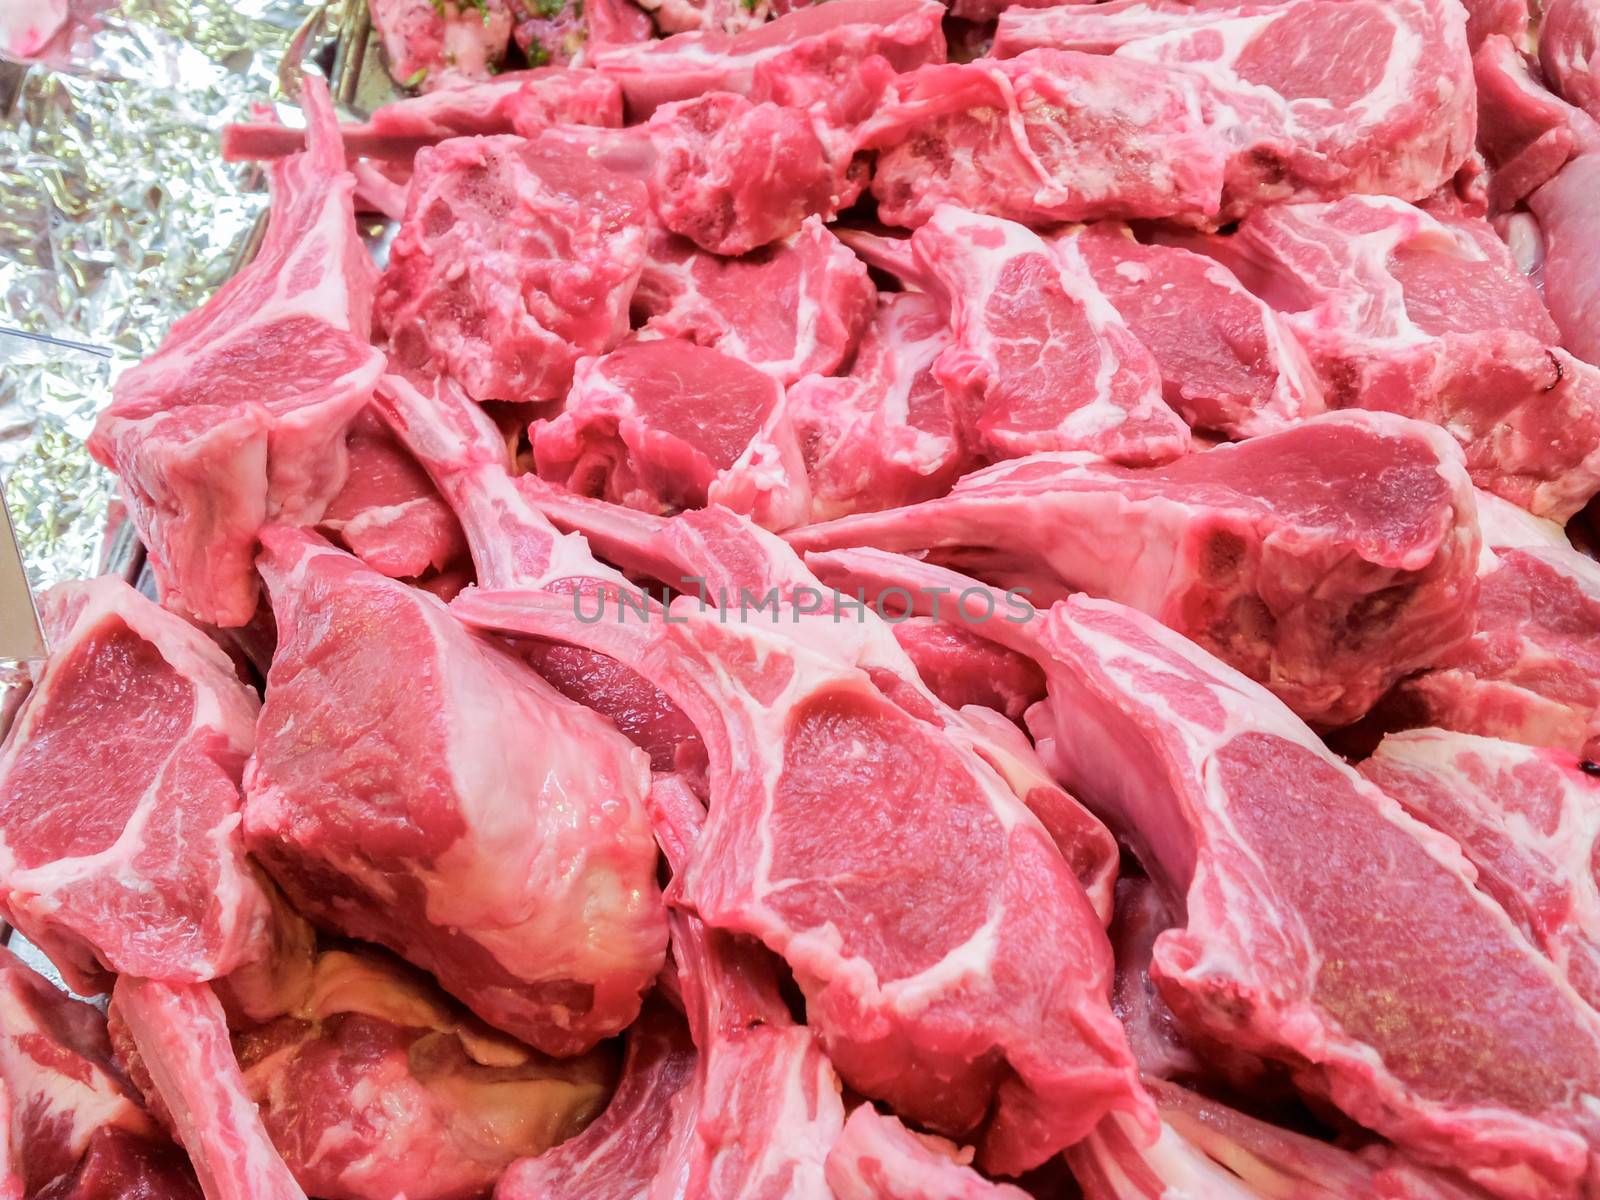 Lamb ribs prepared and presented in a pile